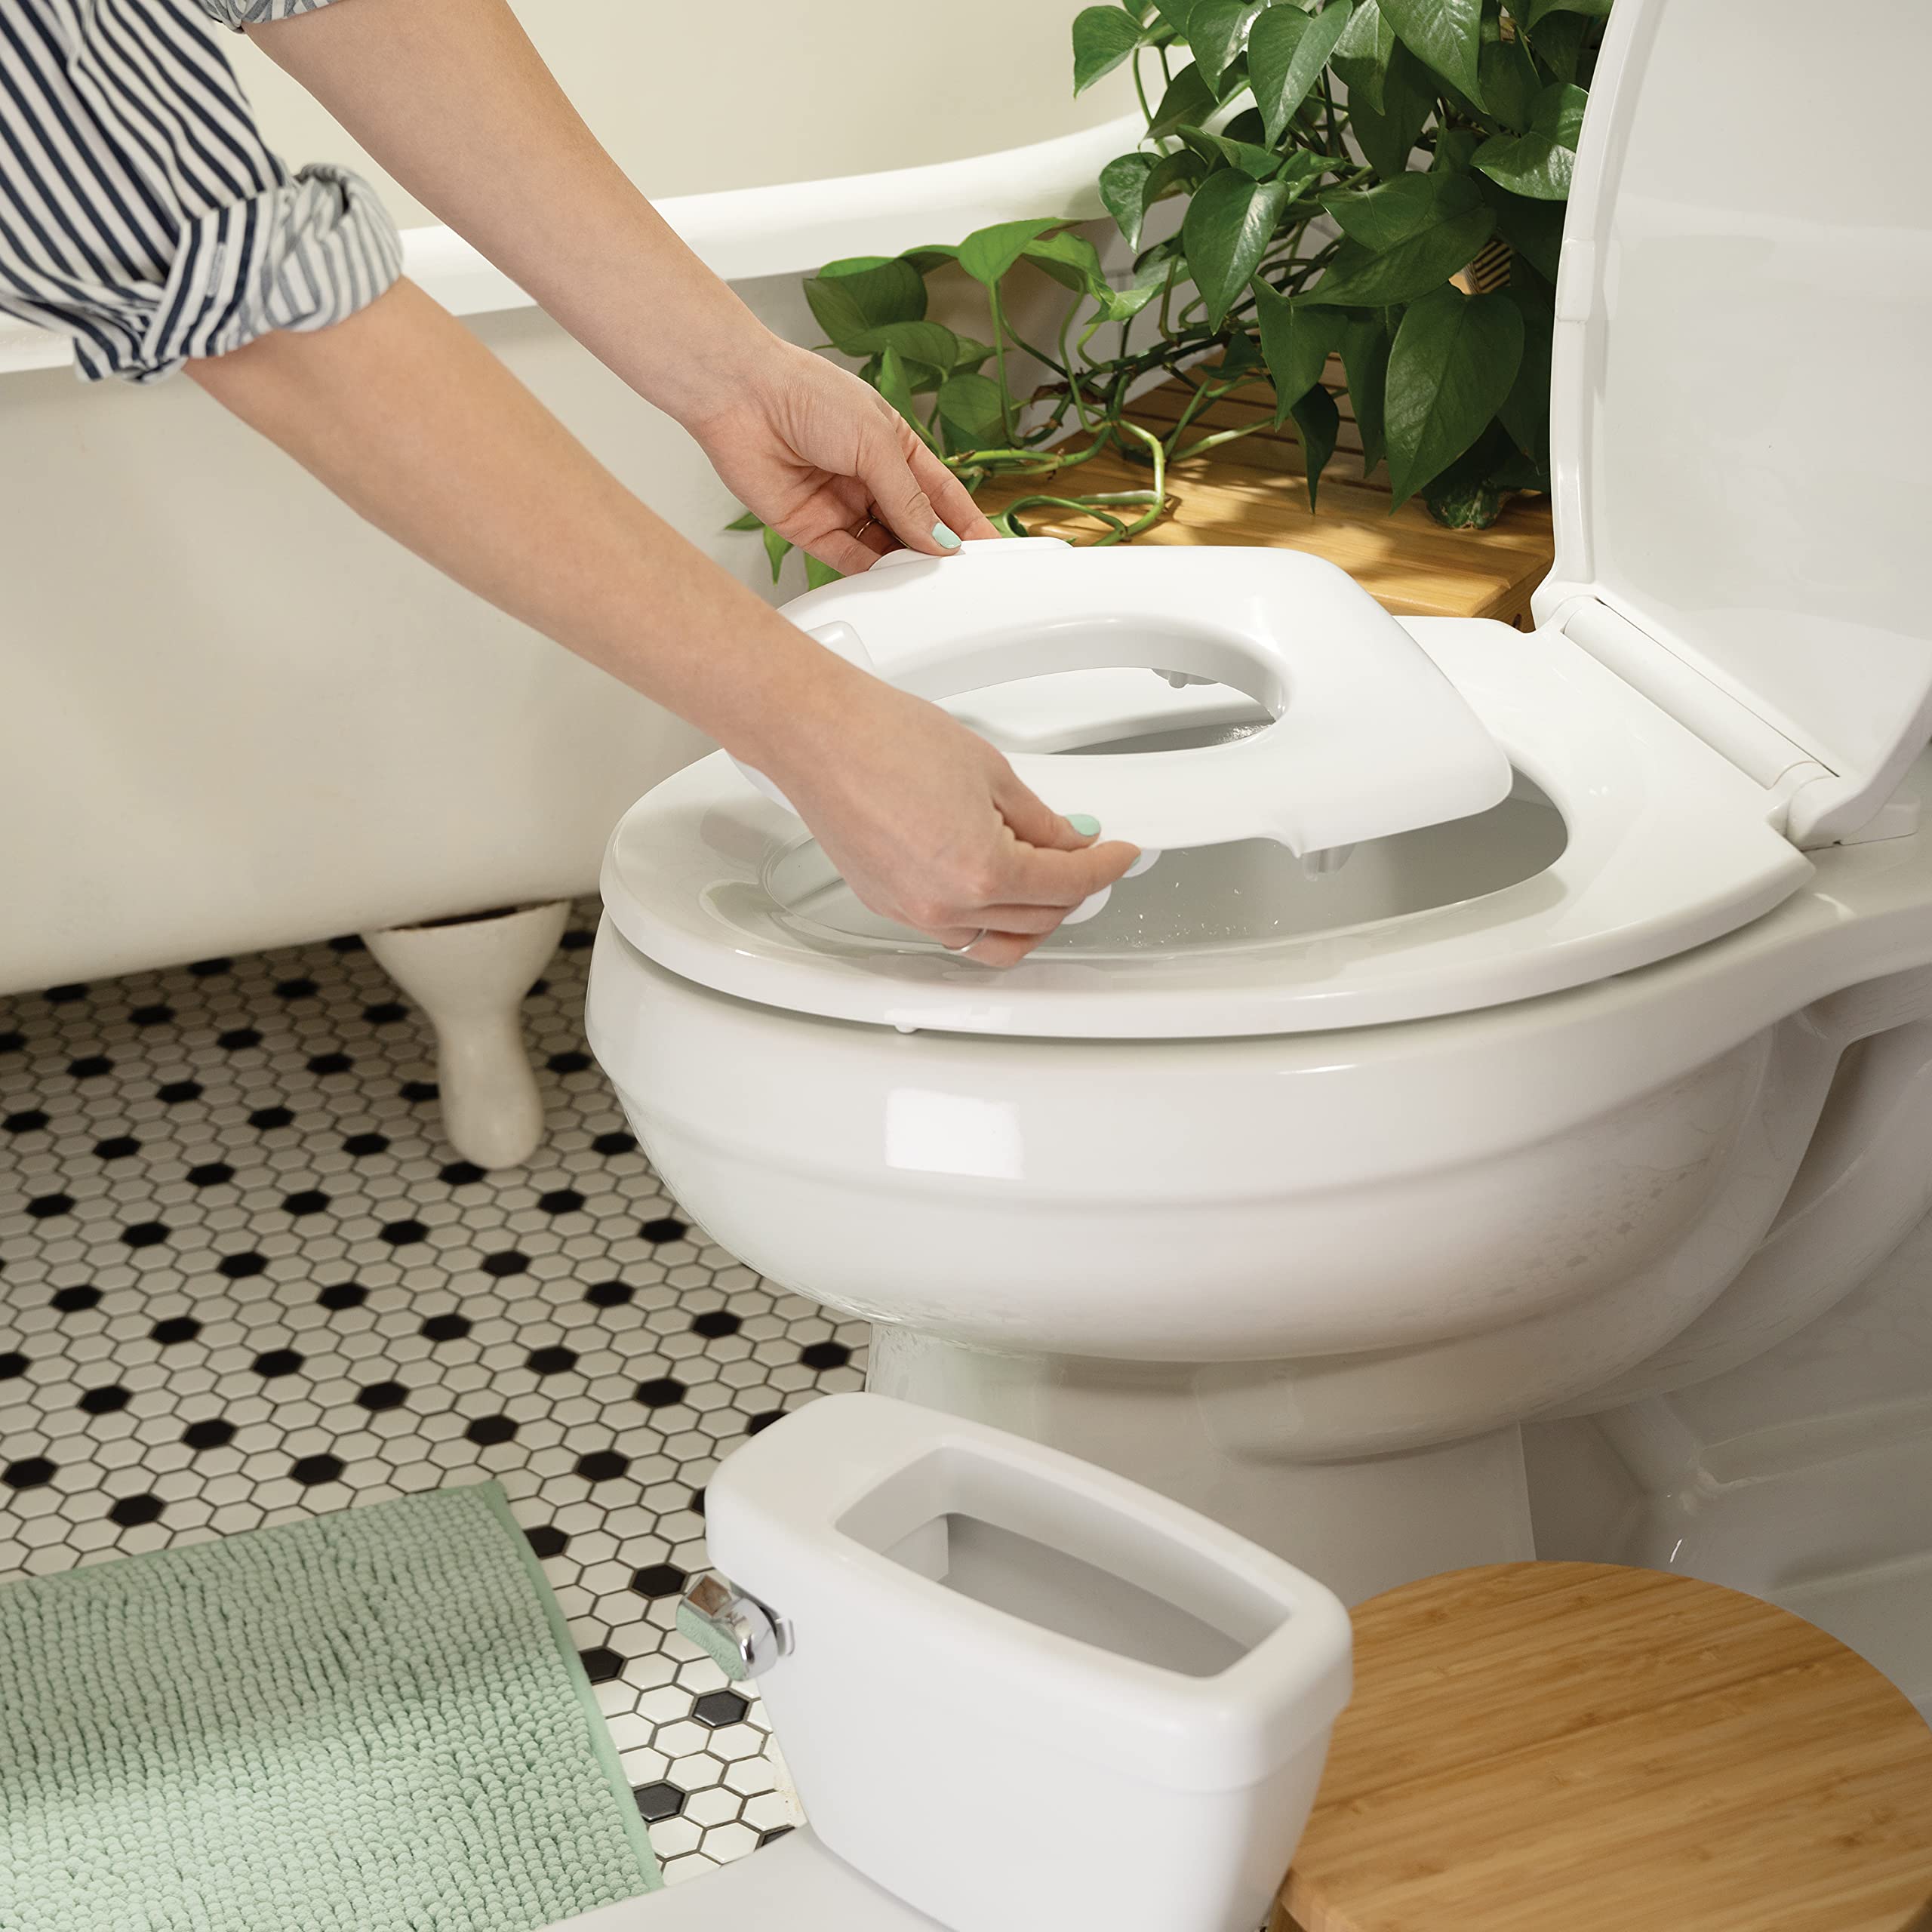 Summer by Ingenuity My Size Potty Pro in White, Infant Potty Training Toilet, Lifelike Flushing Sound, for Ages 18 Months, Up to 50 Pounds